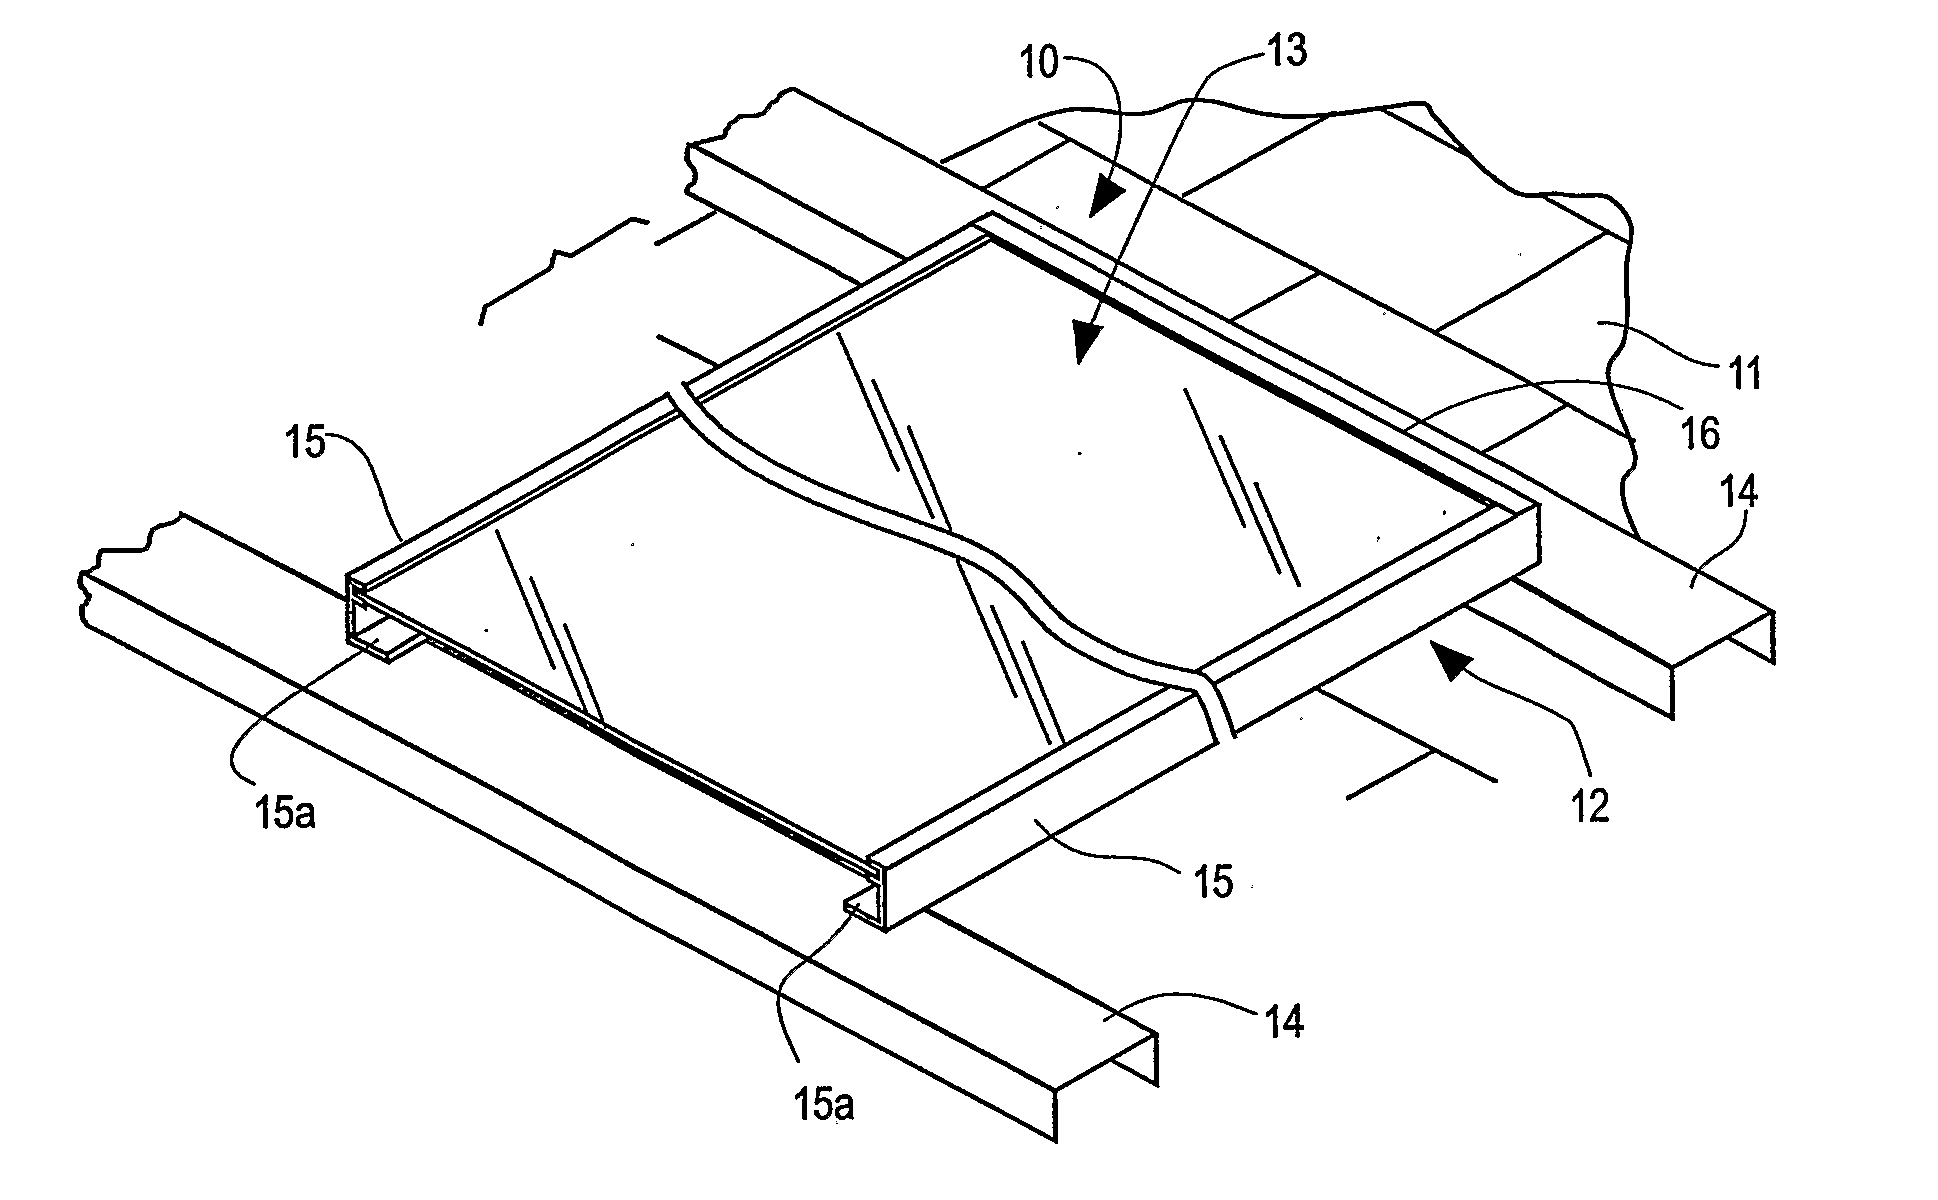 Method and Apparatus for Preventing Distortion of a Framed Solar Module